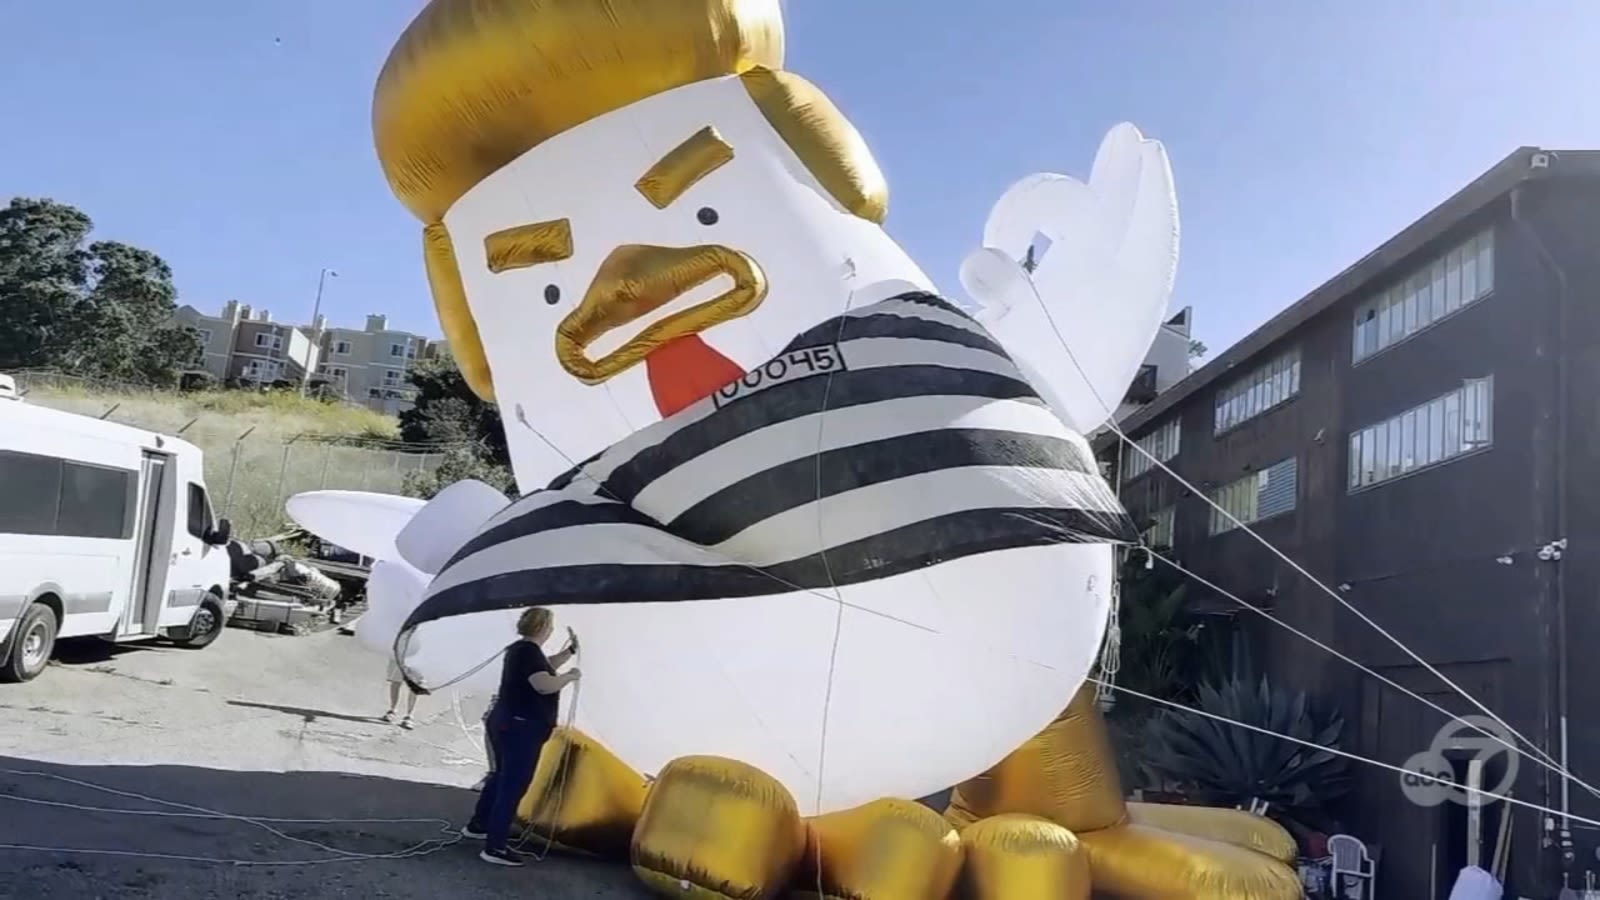 33-foot-tall 'Trump Chicken' resurrected to greet Donald Trump during SF campaign fundraiser visit